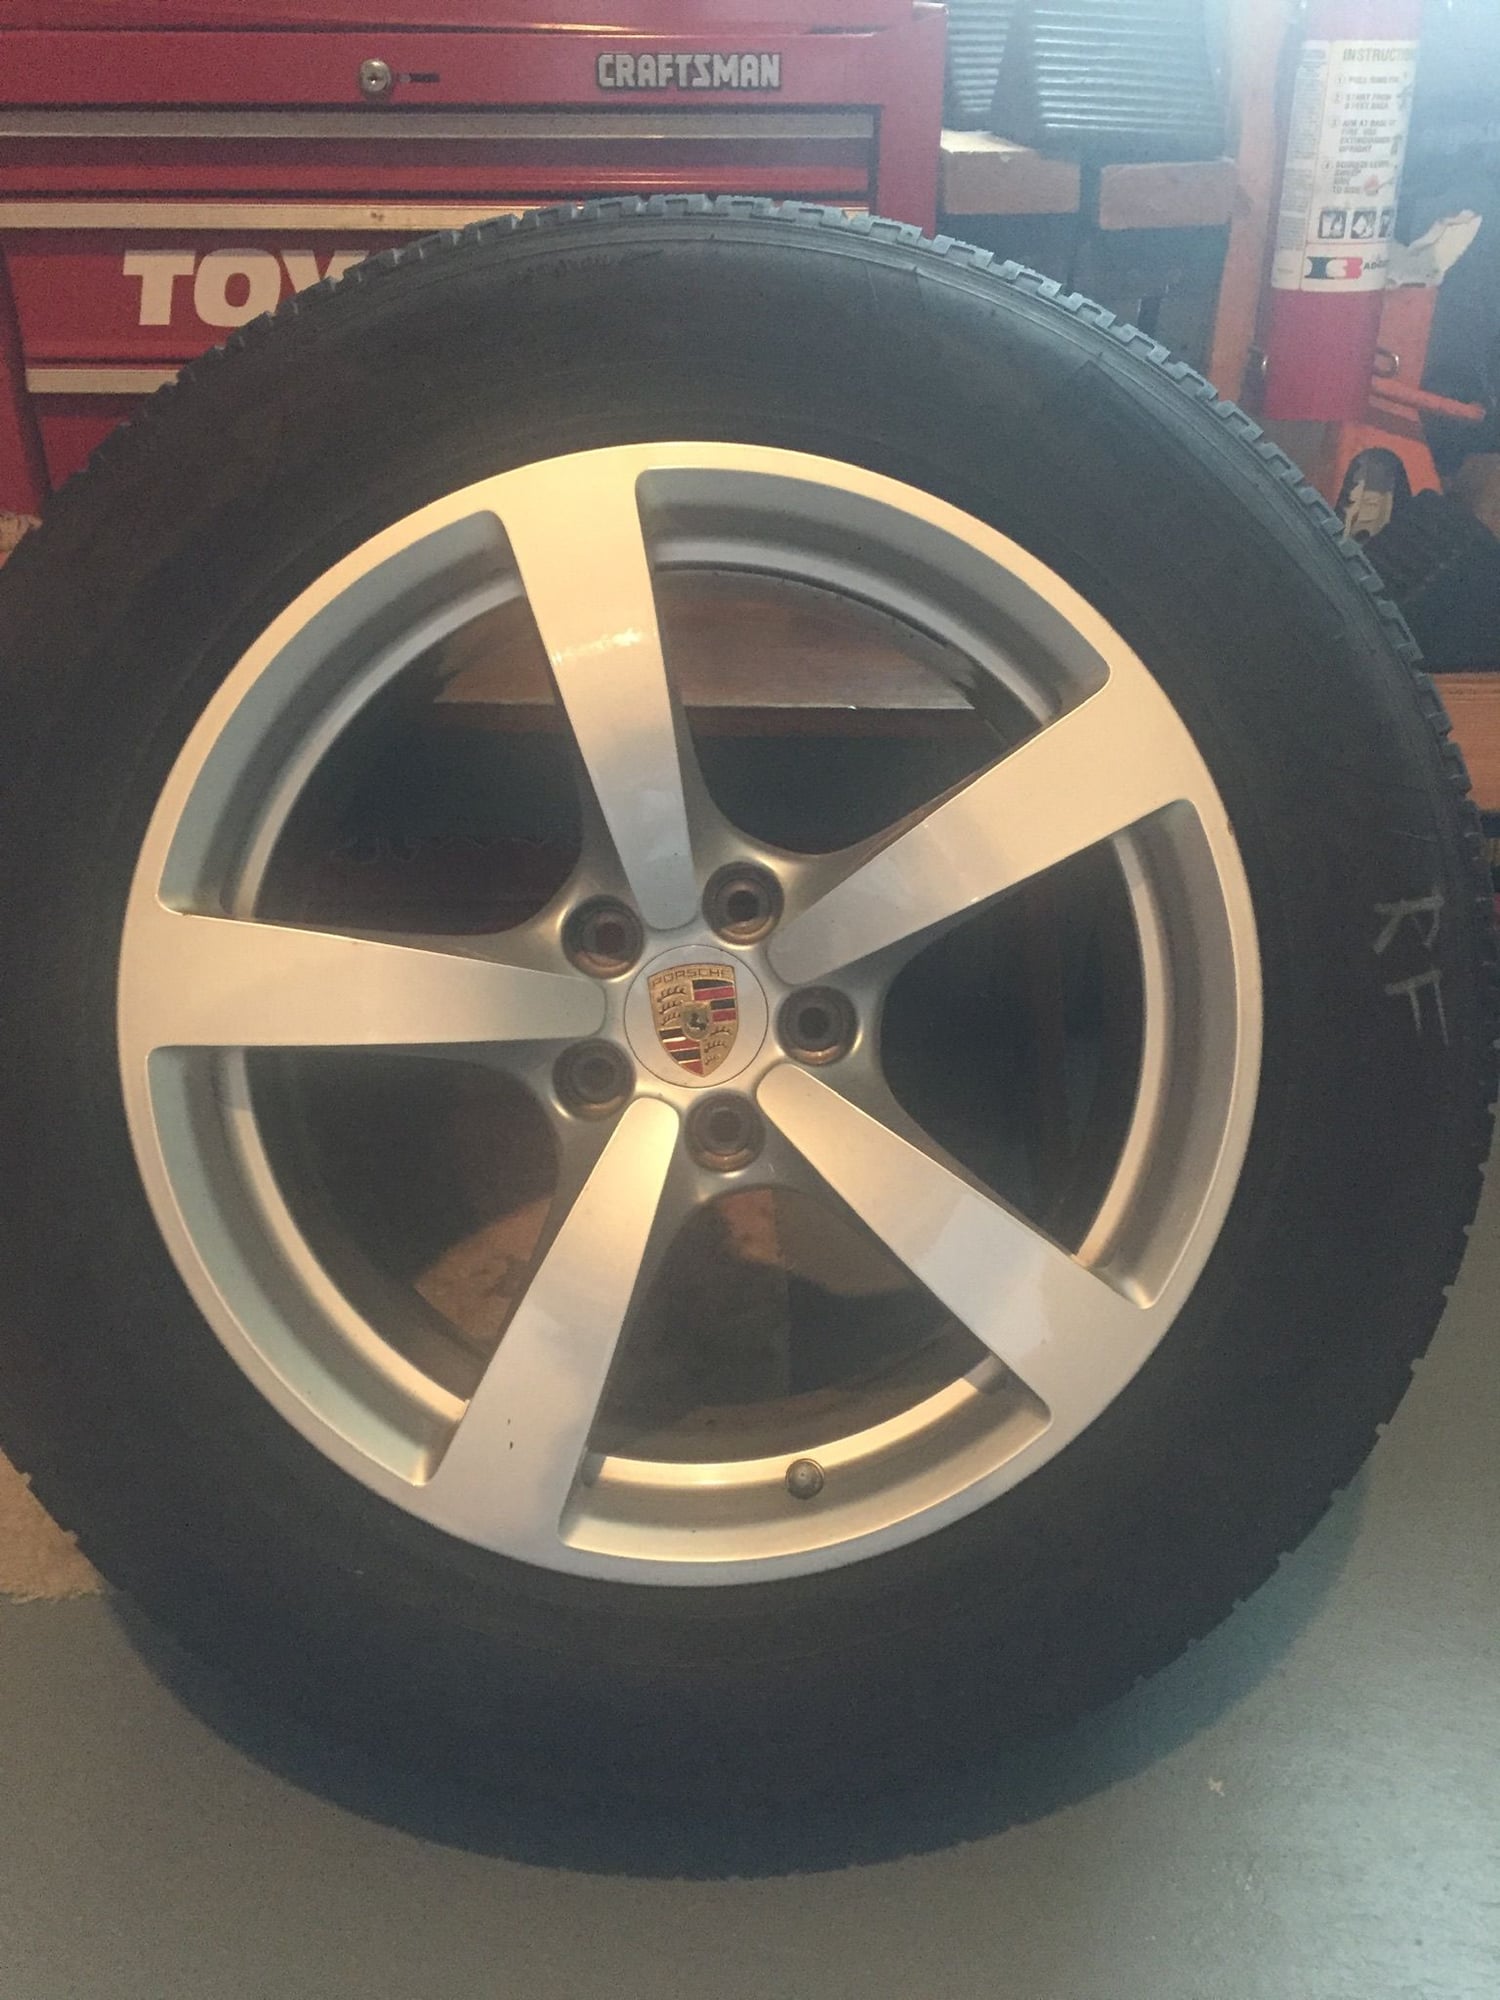 Wheels and Tires/Axles - Macan 18" Winter Wheels - Used - Cleveland, OH 44133, United States